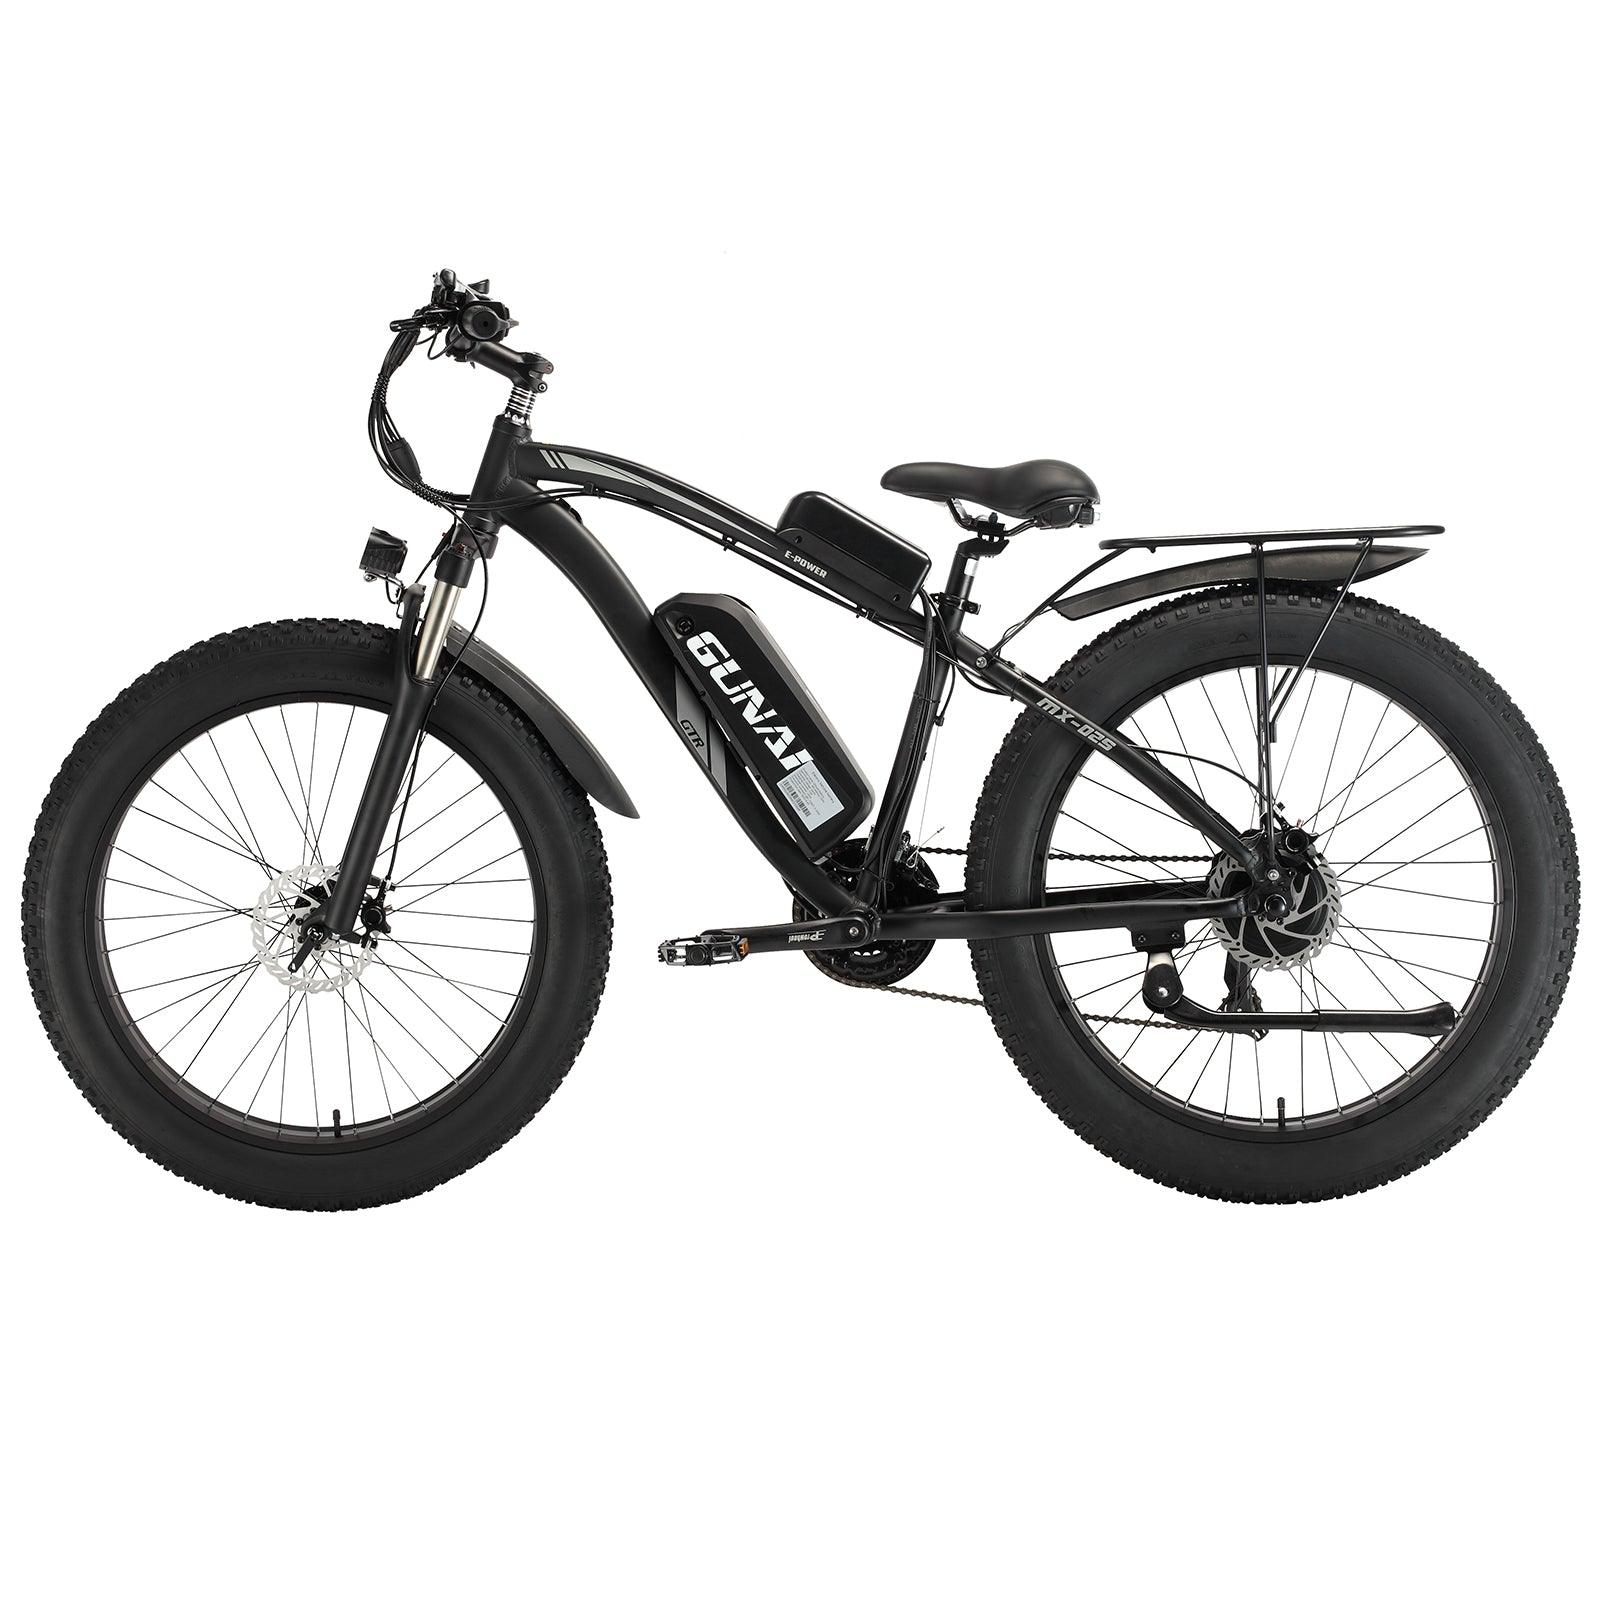 GUNAI MX02S 1000W 26'' Fat Tire Electric Bike with 48V 17Ah Removable  Battery